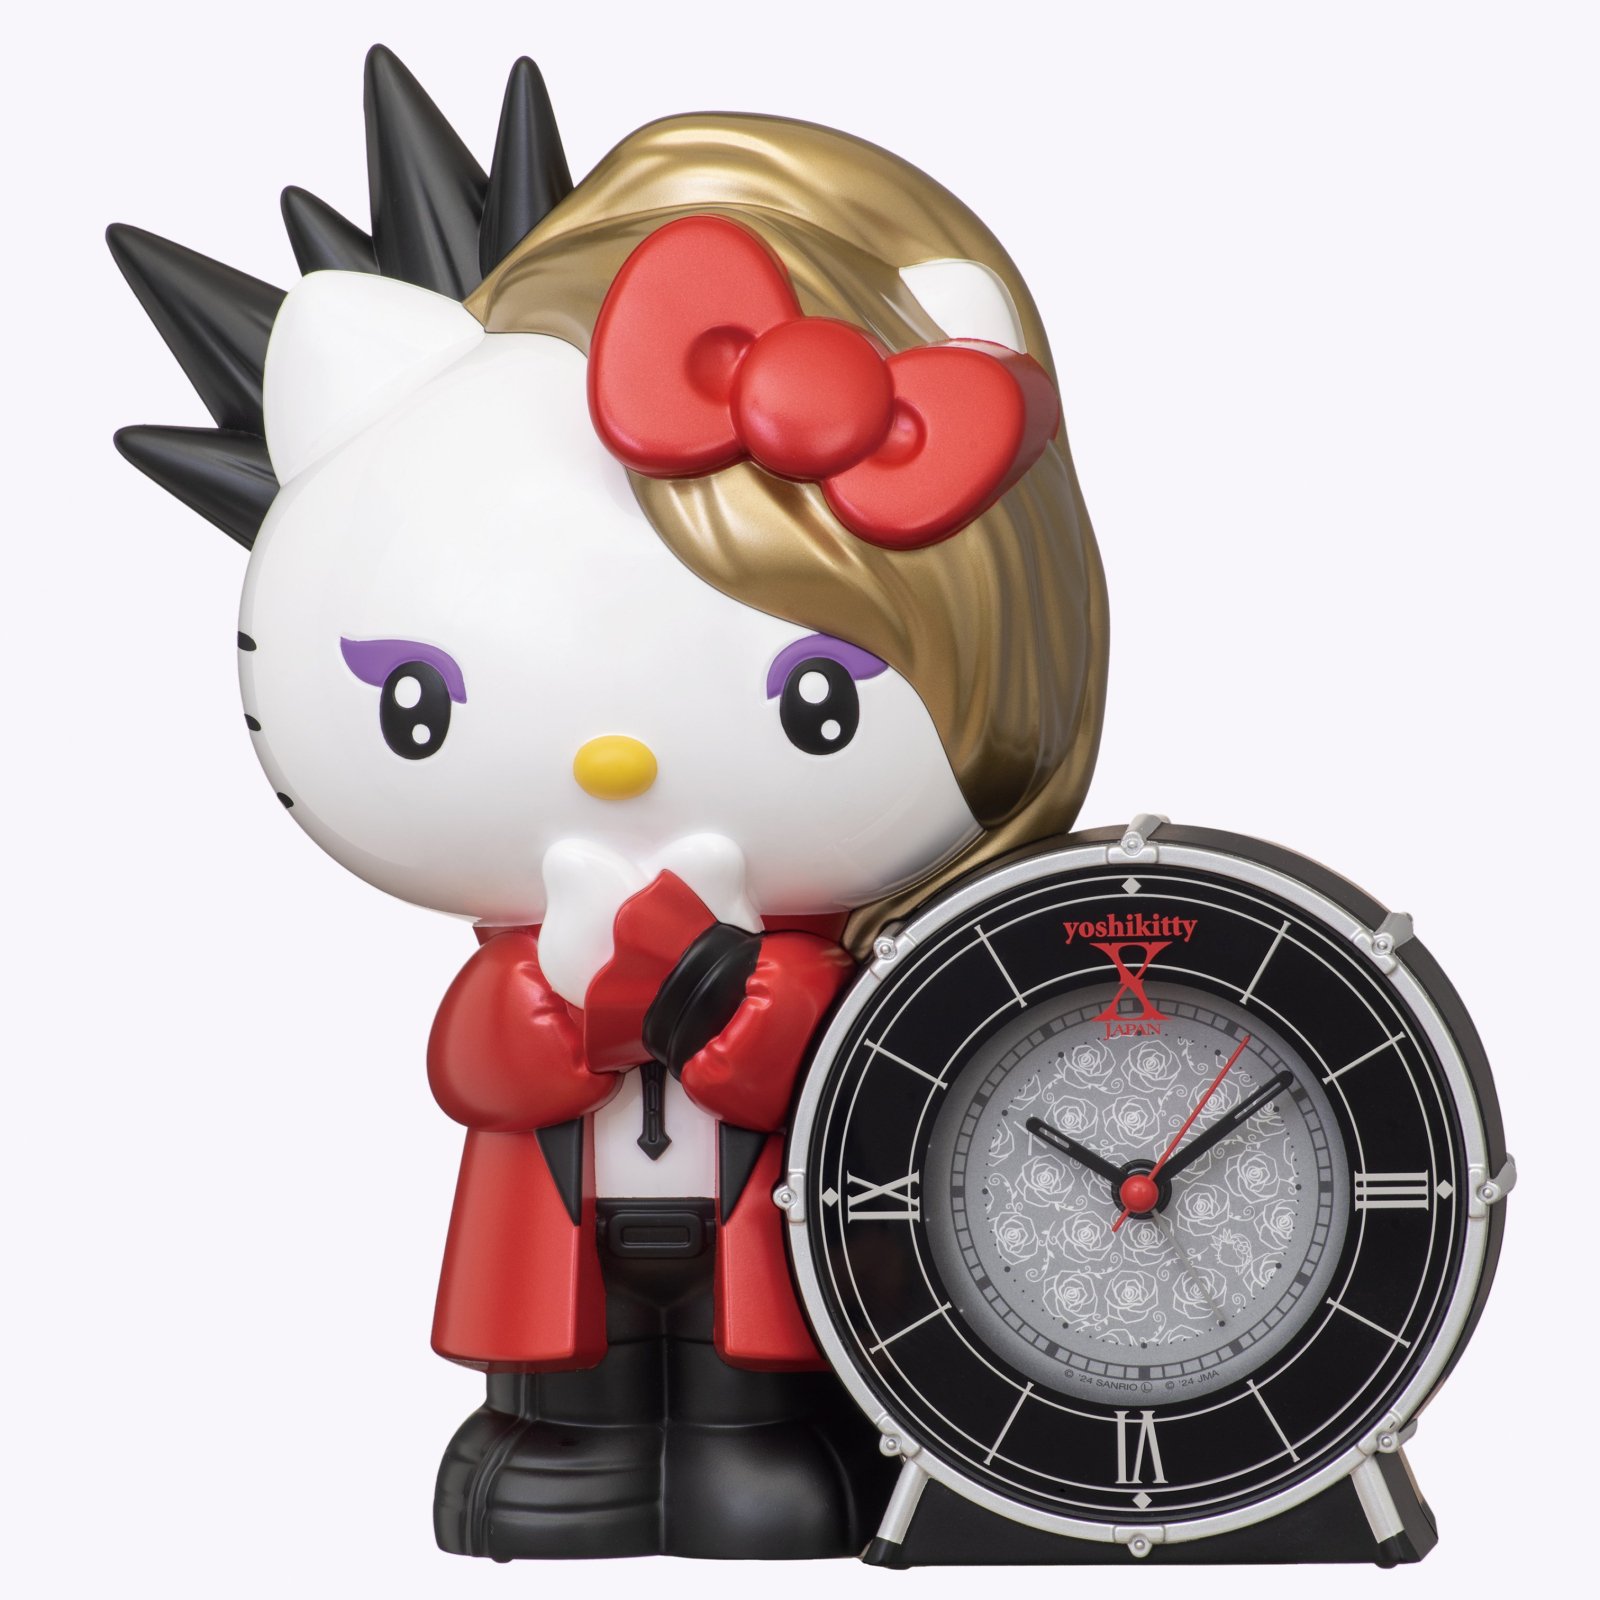 ͽ䡦Ϥͽ6ܡyoshikitty Ĥܤޤ()<img class='new_mark_img2' src='https://img.shop-pro.jp/img/new/icons15.gif' style='border:none;display:inline;margin:0px;padding:0px;width:auto;' />